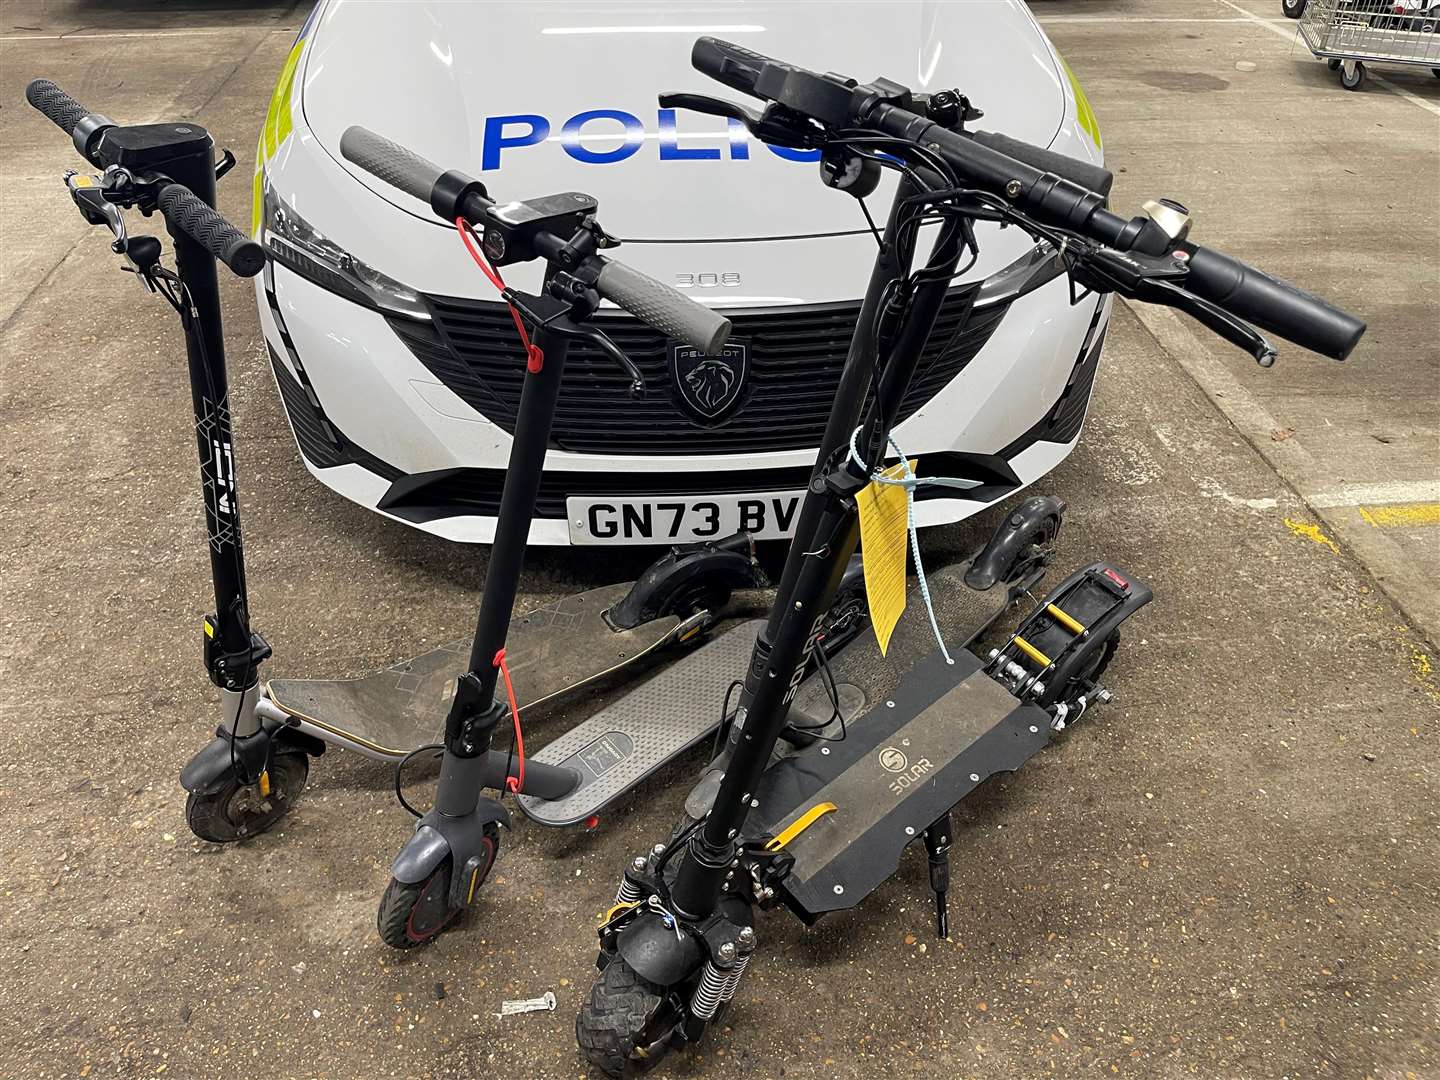 Thirty electric scooters have been seized in Maidstone